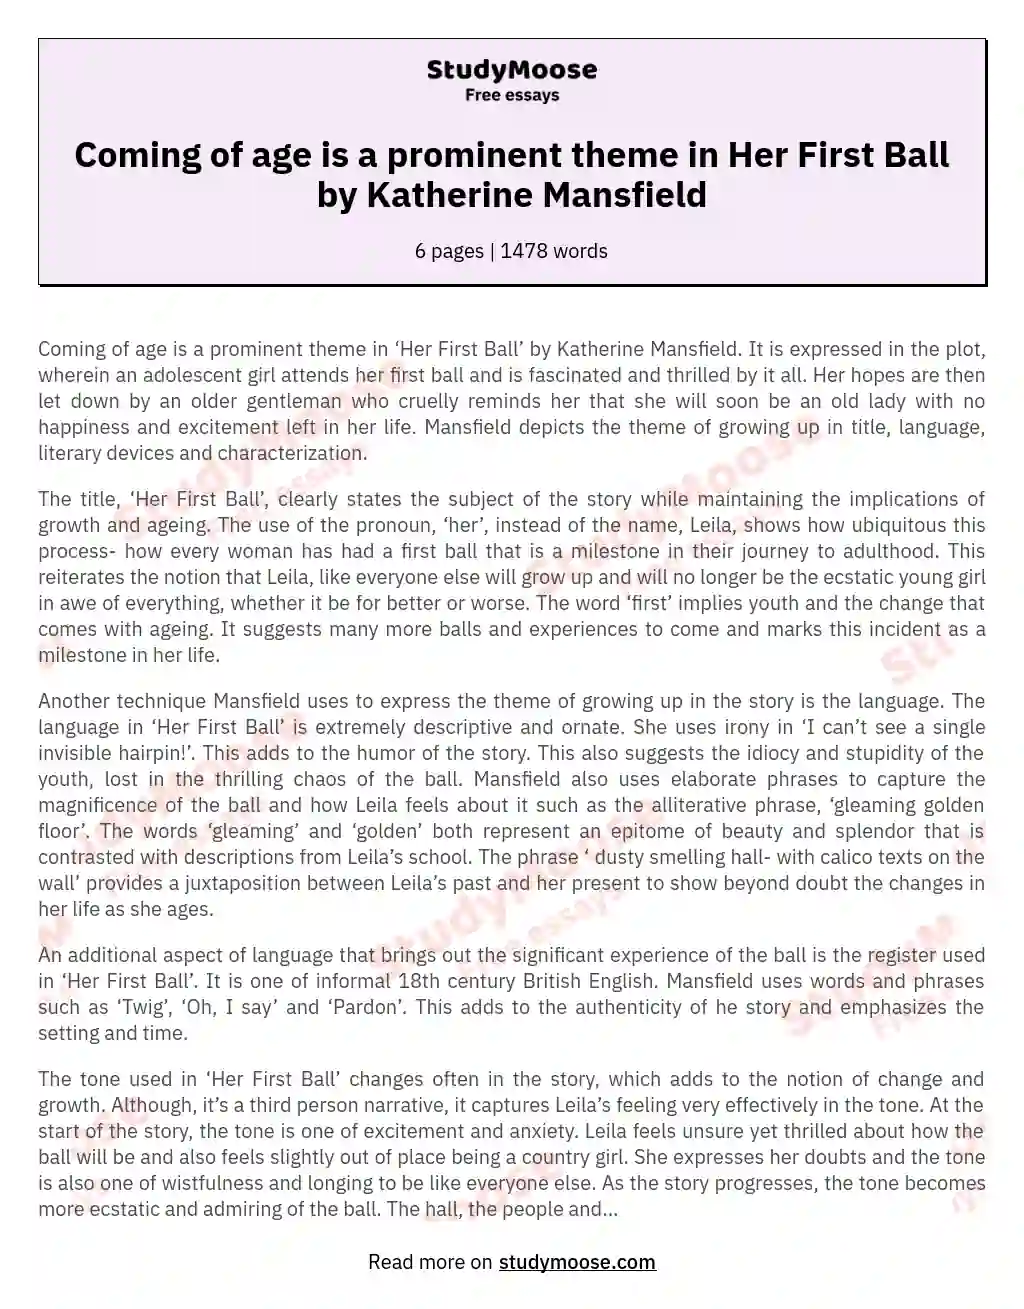 Coming of age is a prominent theme in Her First Ball by Katherine Mansfield